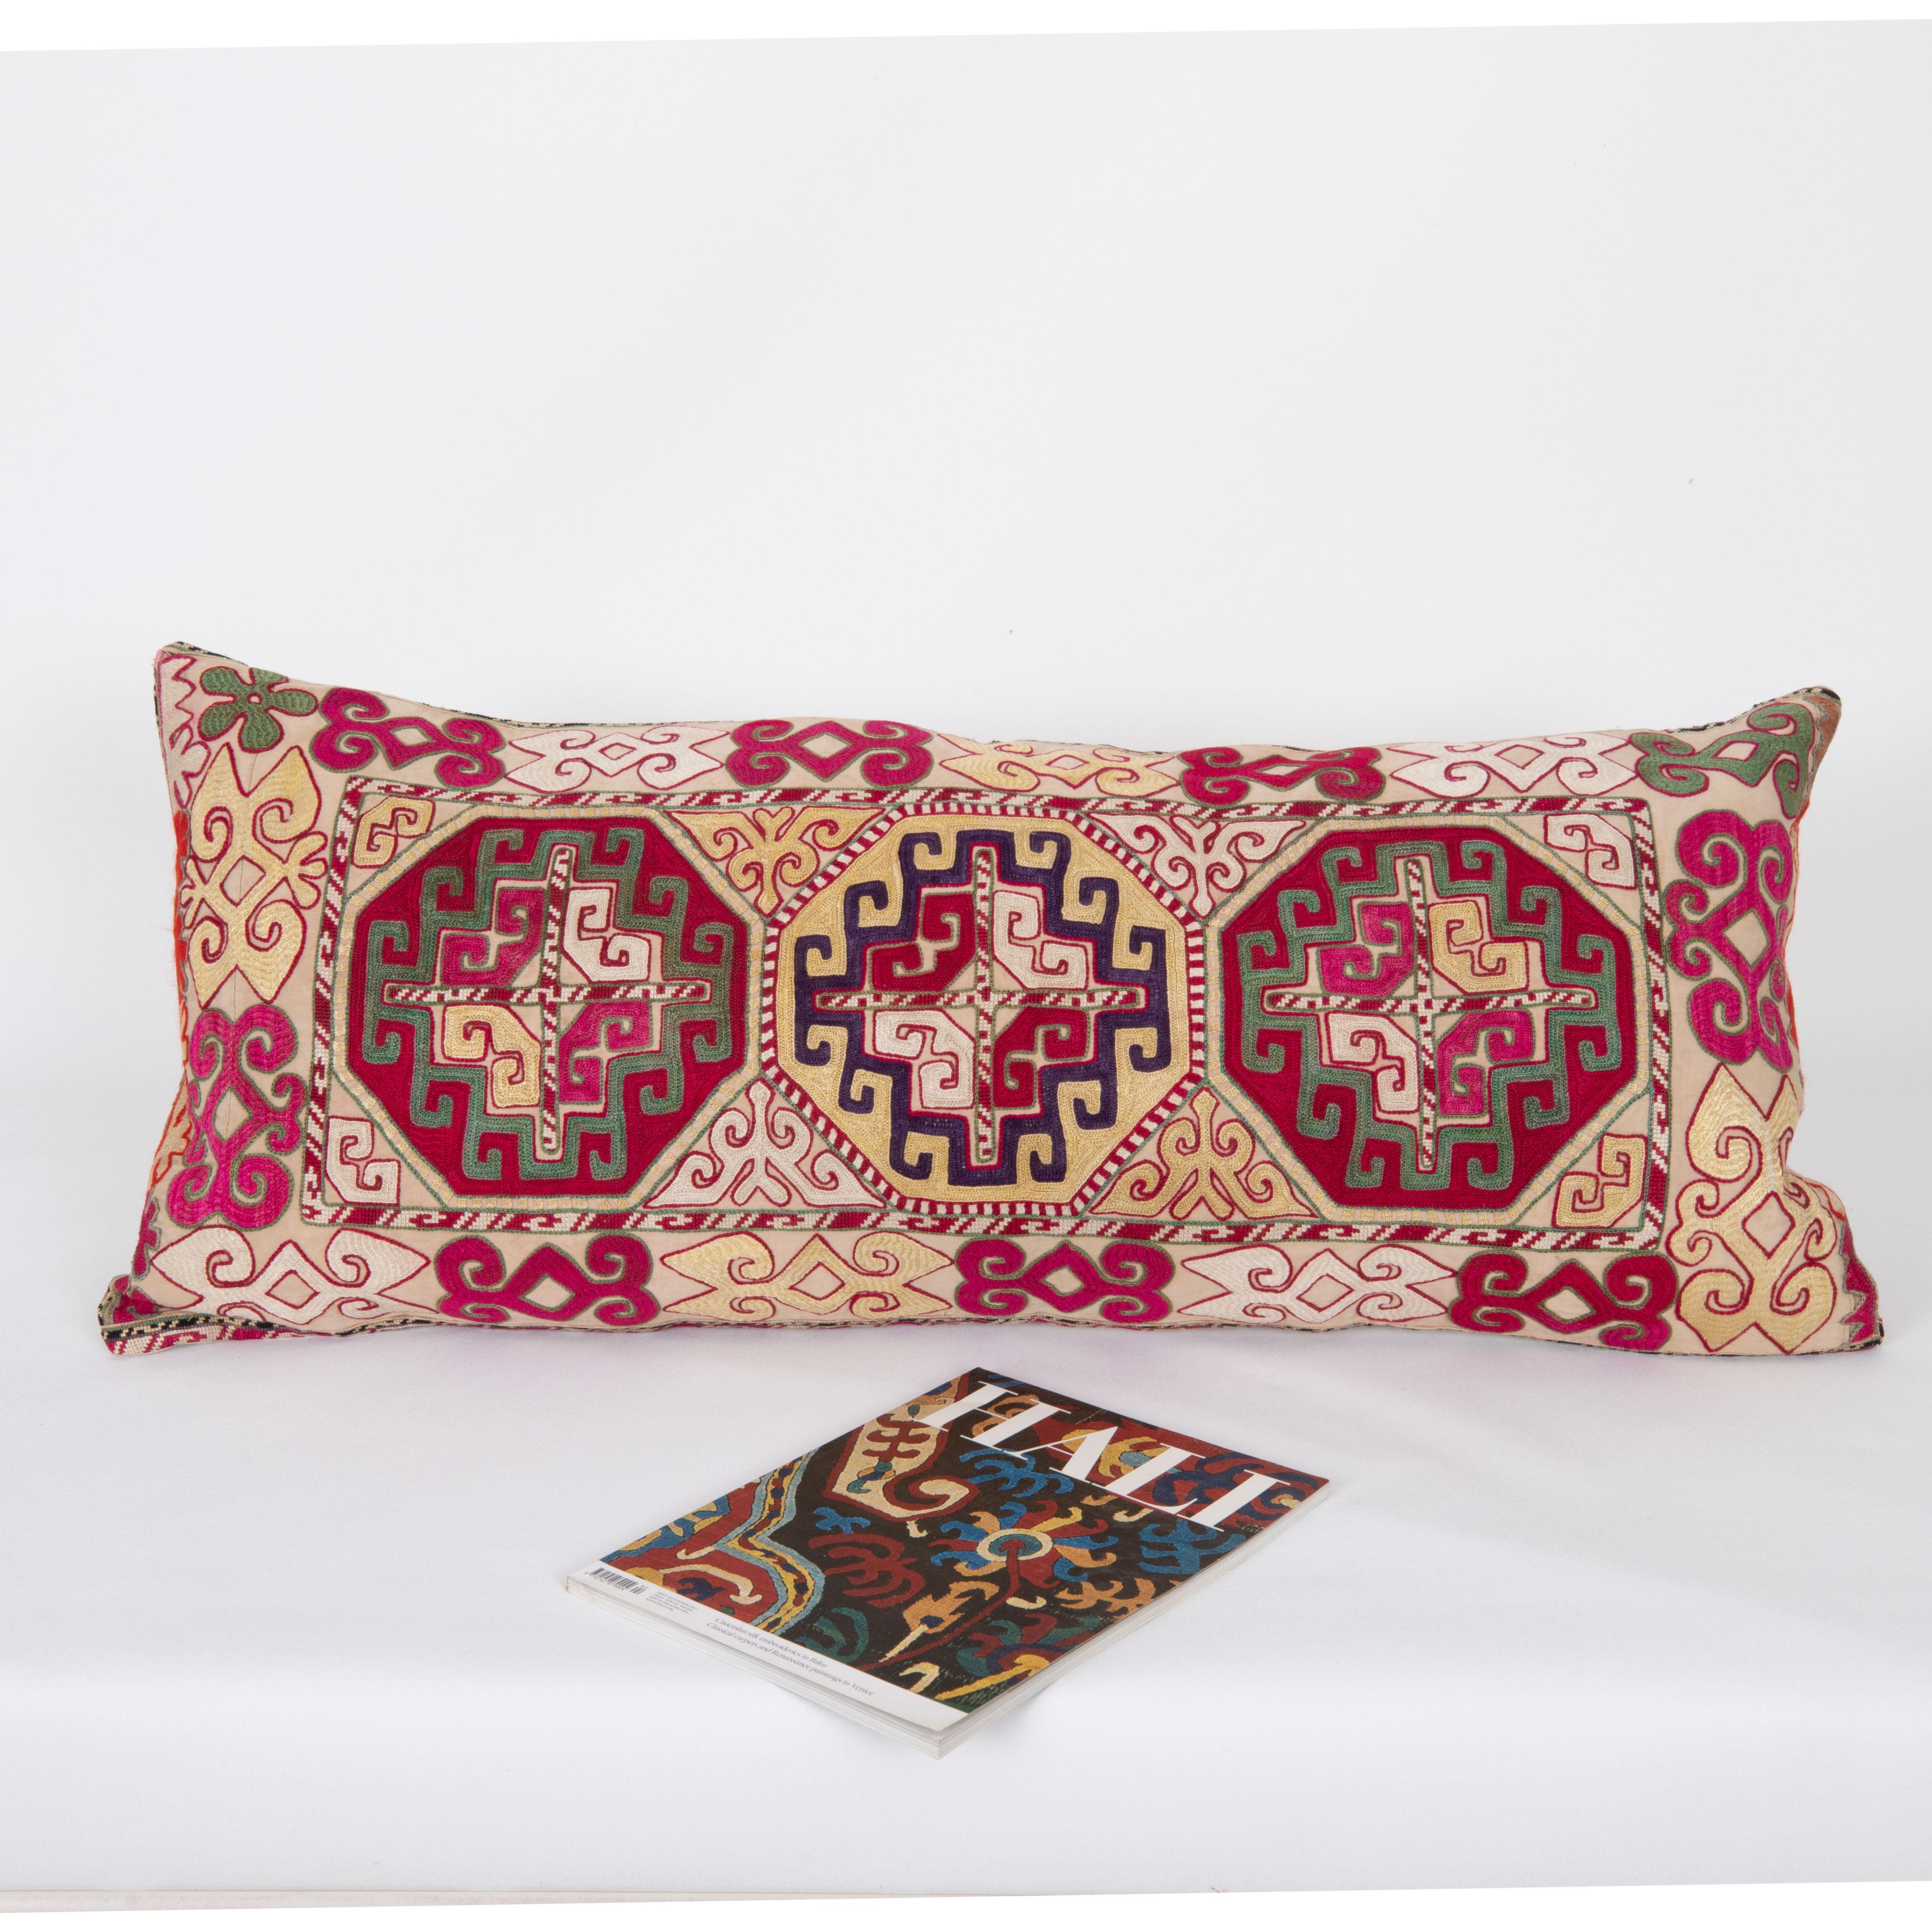 Suzani Pillow Cover, Made from a 1970s/80s silk mafrash ( storage bag ) Panel For Sale